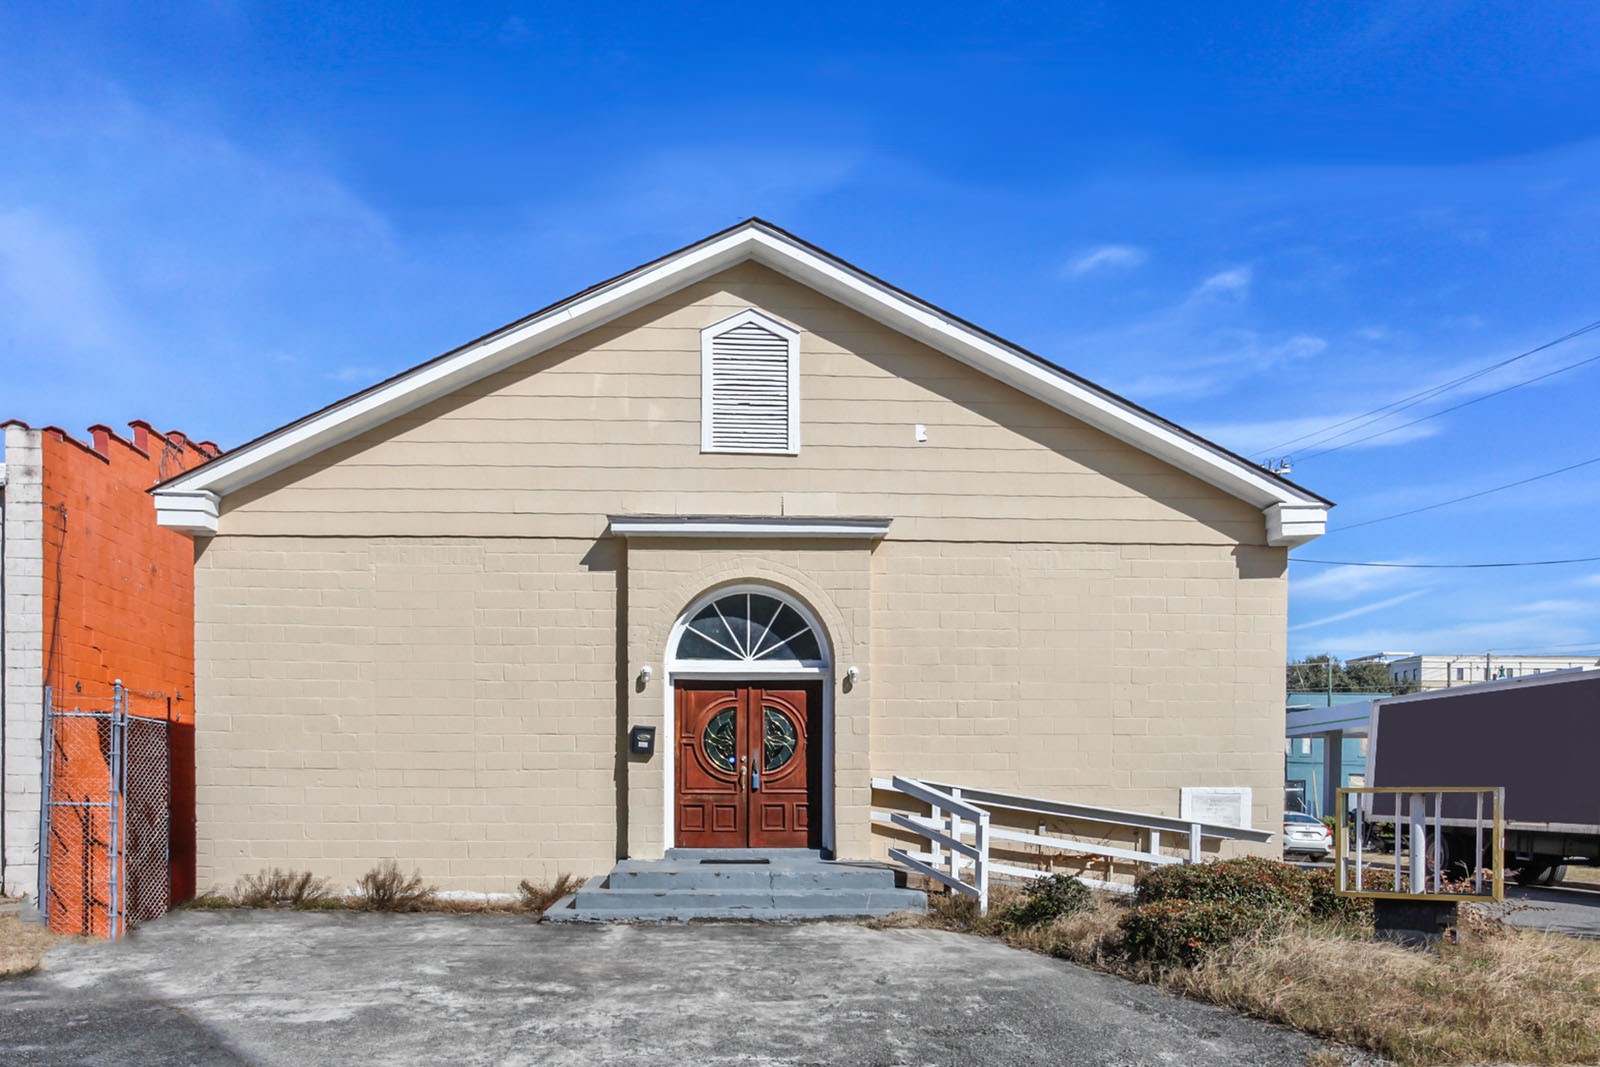 Rare offering of a former church building dating back to 1912 and mostly rebuilt in 1960 of cinder block construction.